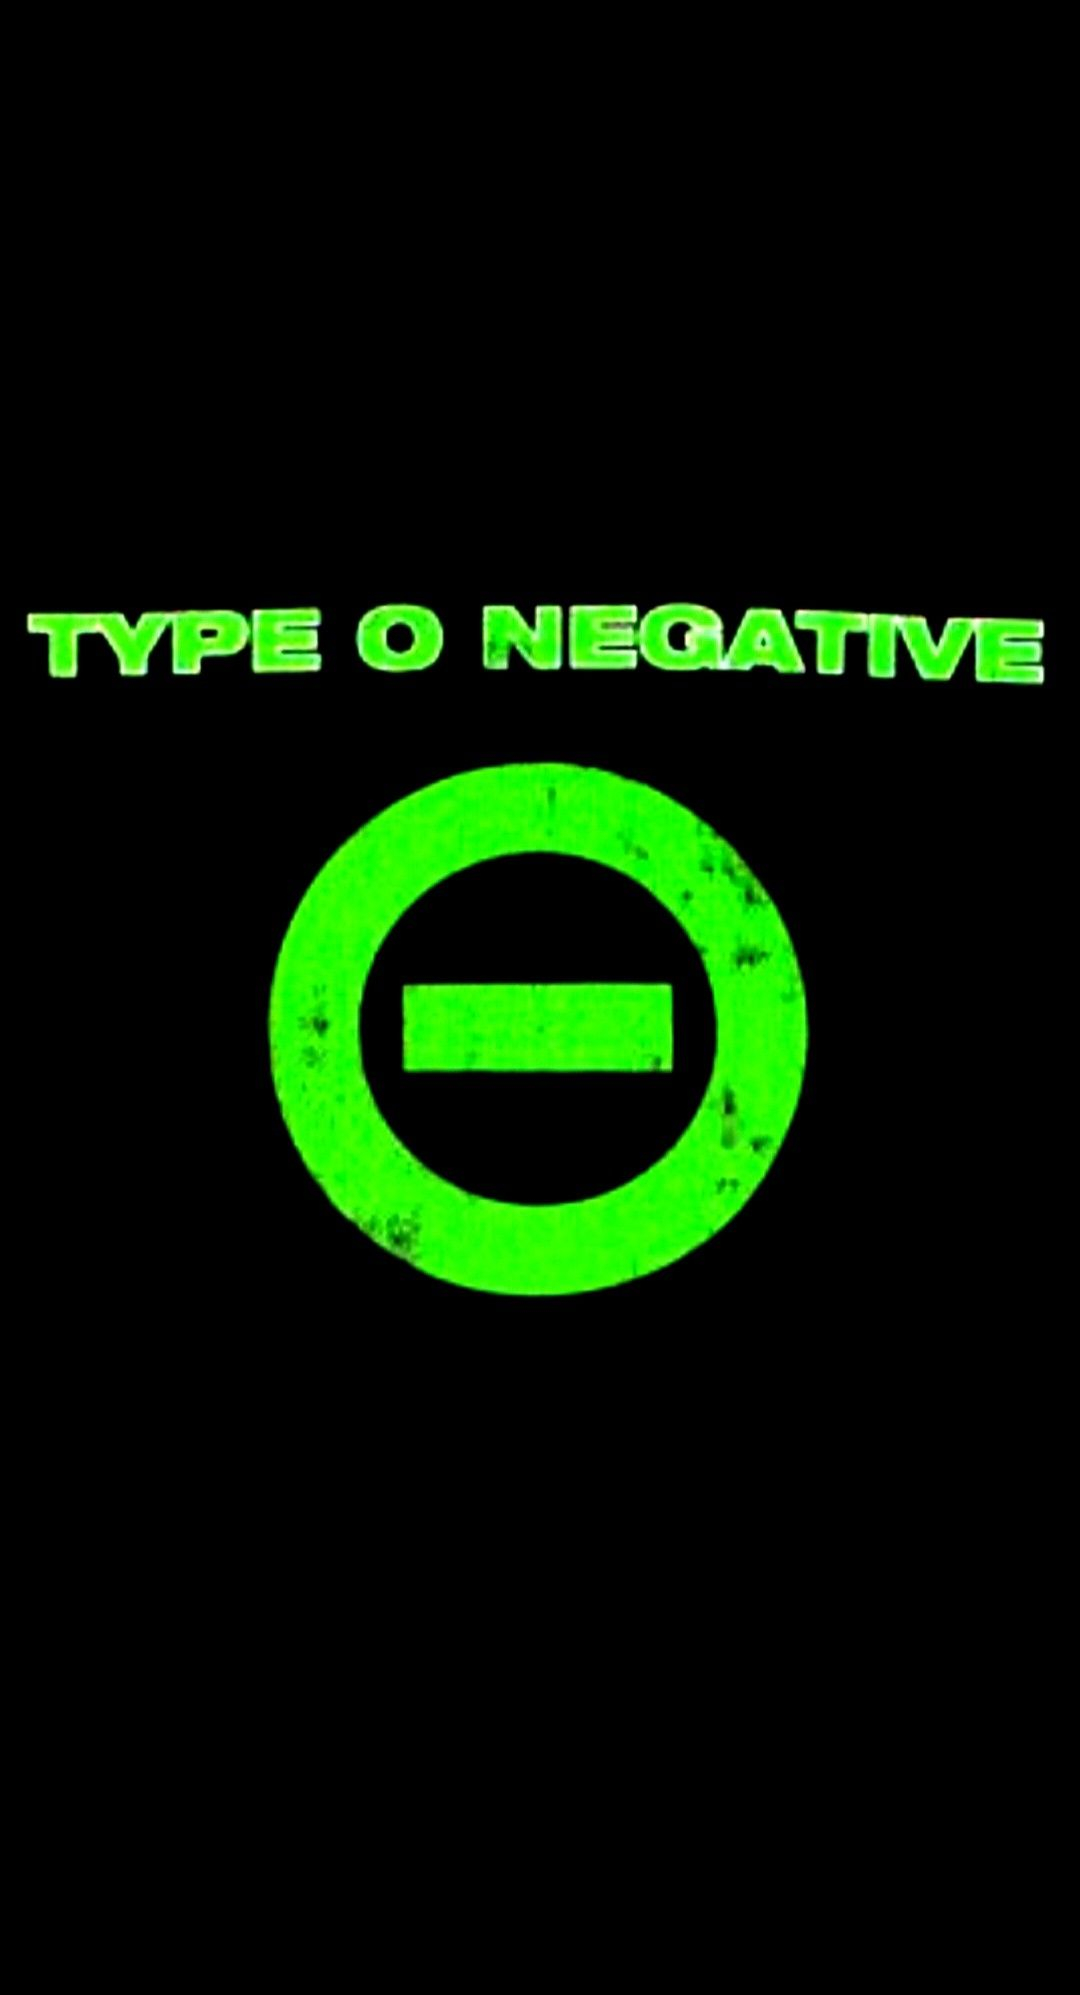 1080x1995 Pin by Kevin on TYPE O NEGATIVE | Type o negative band, Type o negative, Peter steele